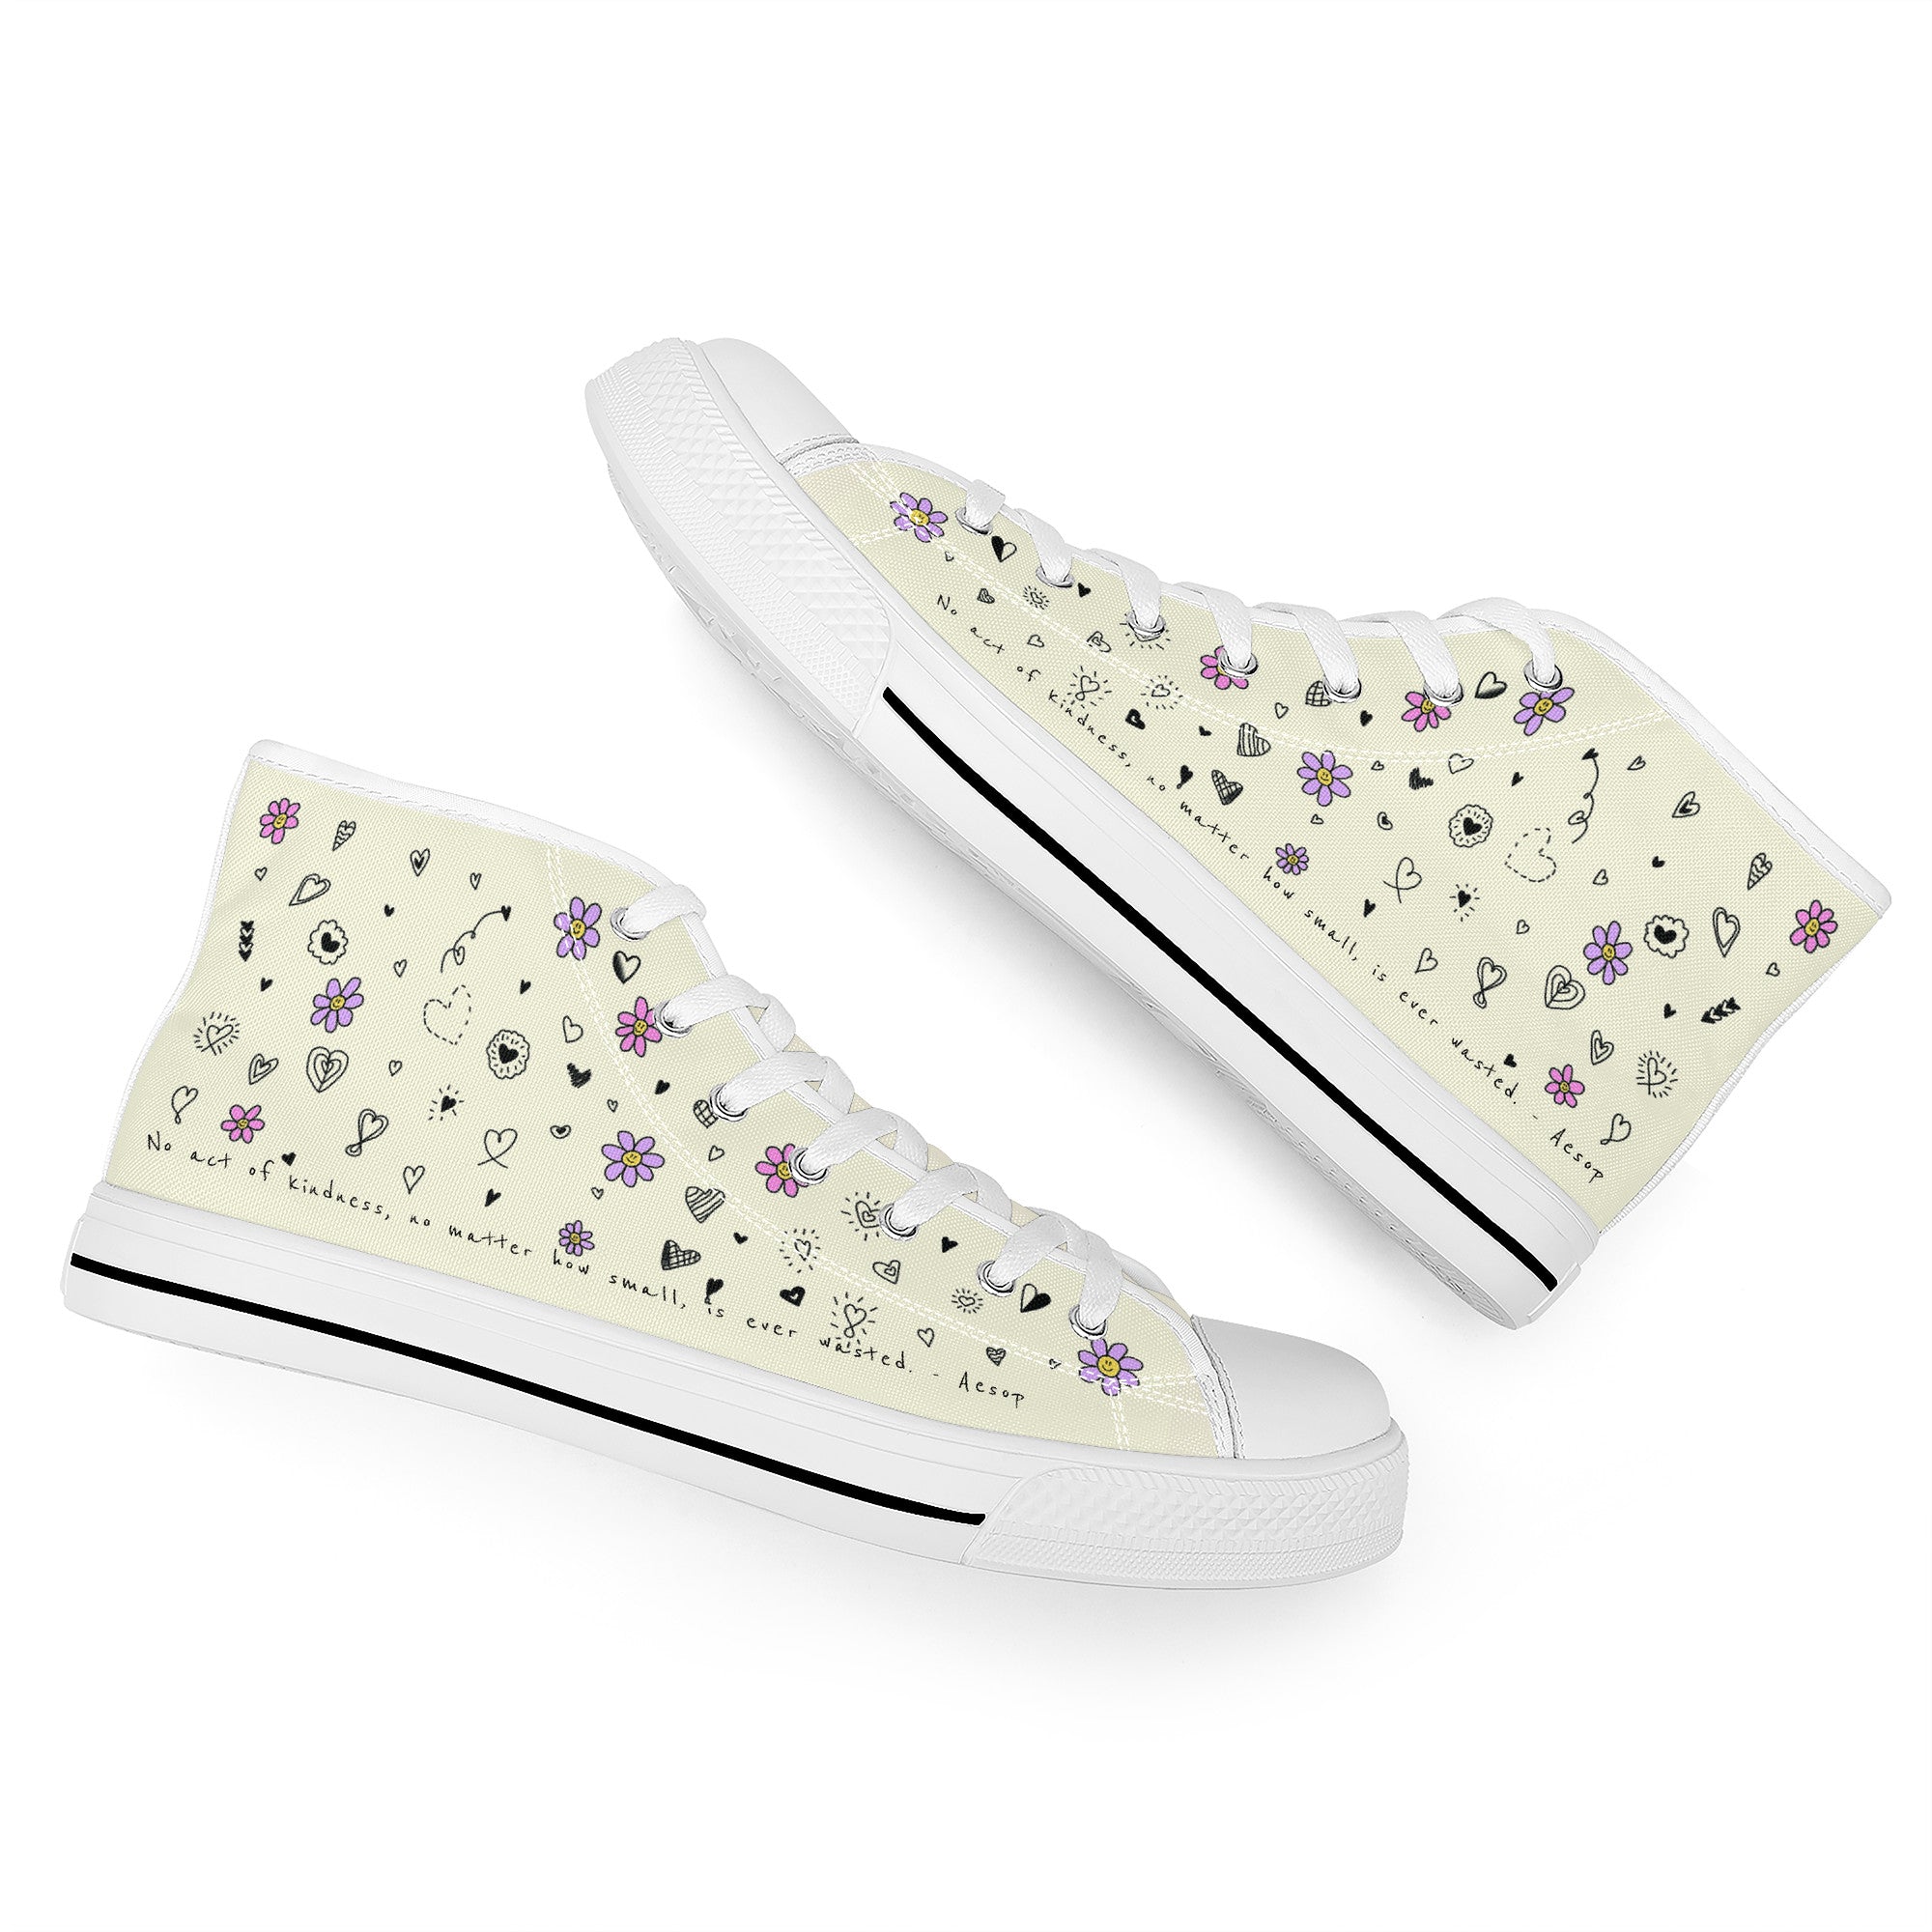 Cameron S Customized High-Top Canvas Shoes With Customized Tongue - White - Shoe Zero